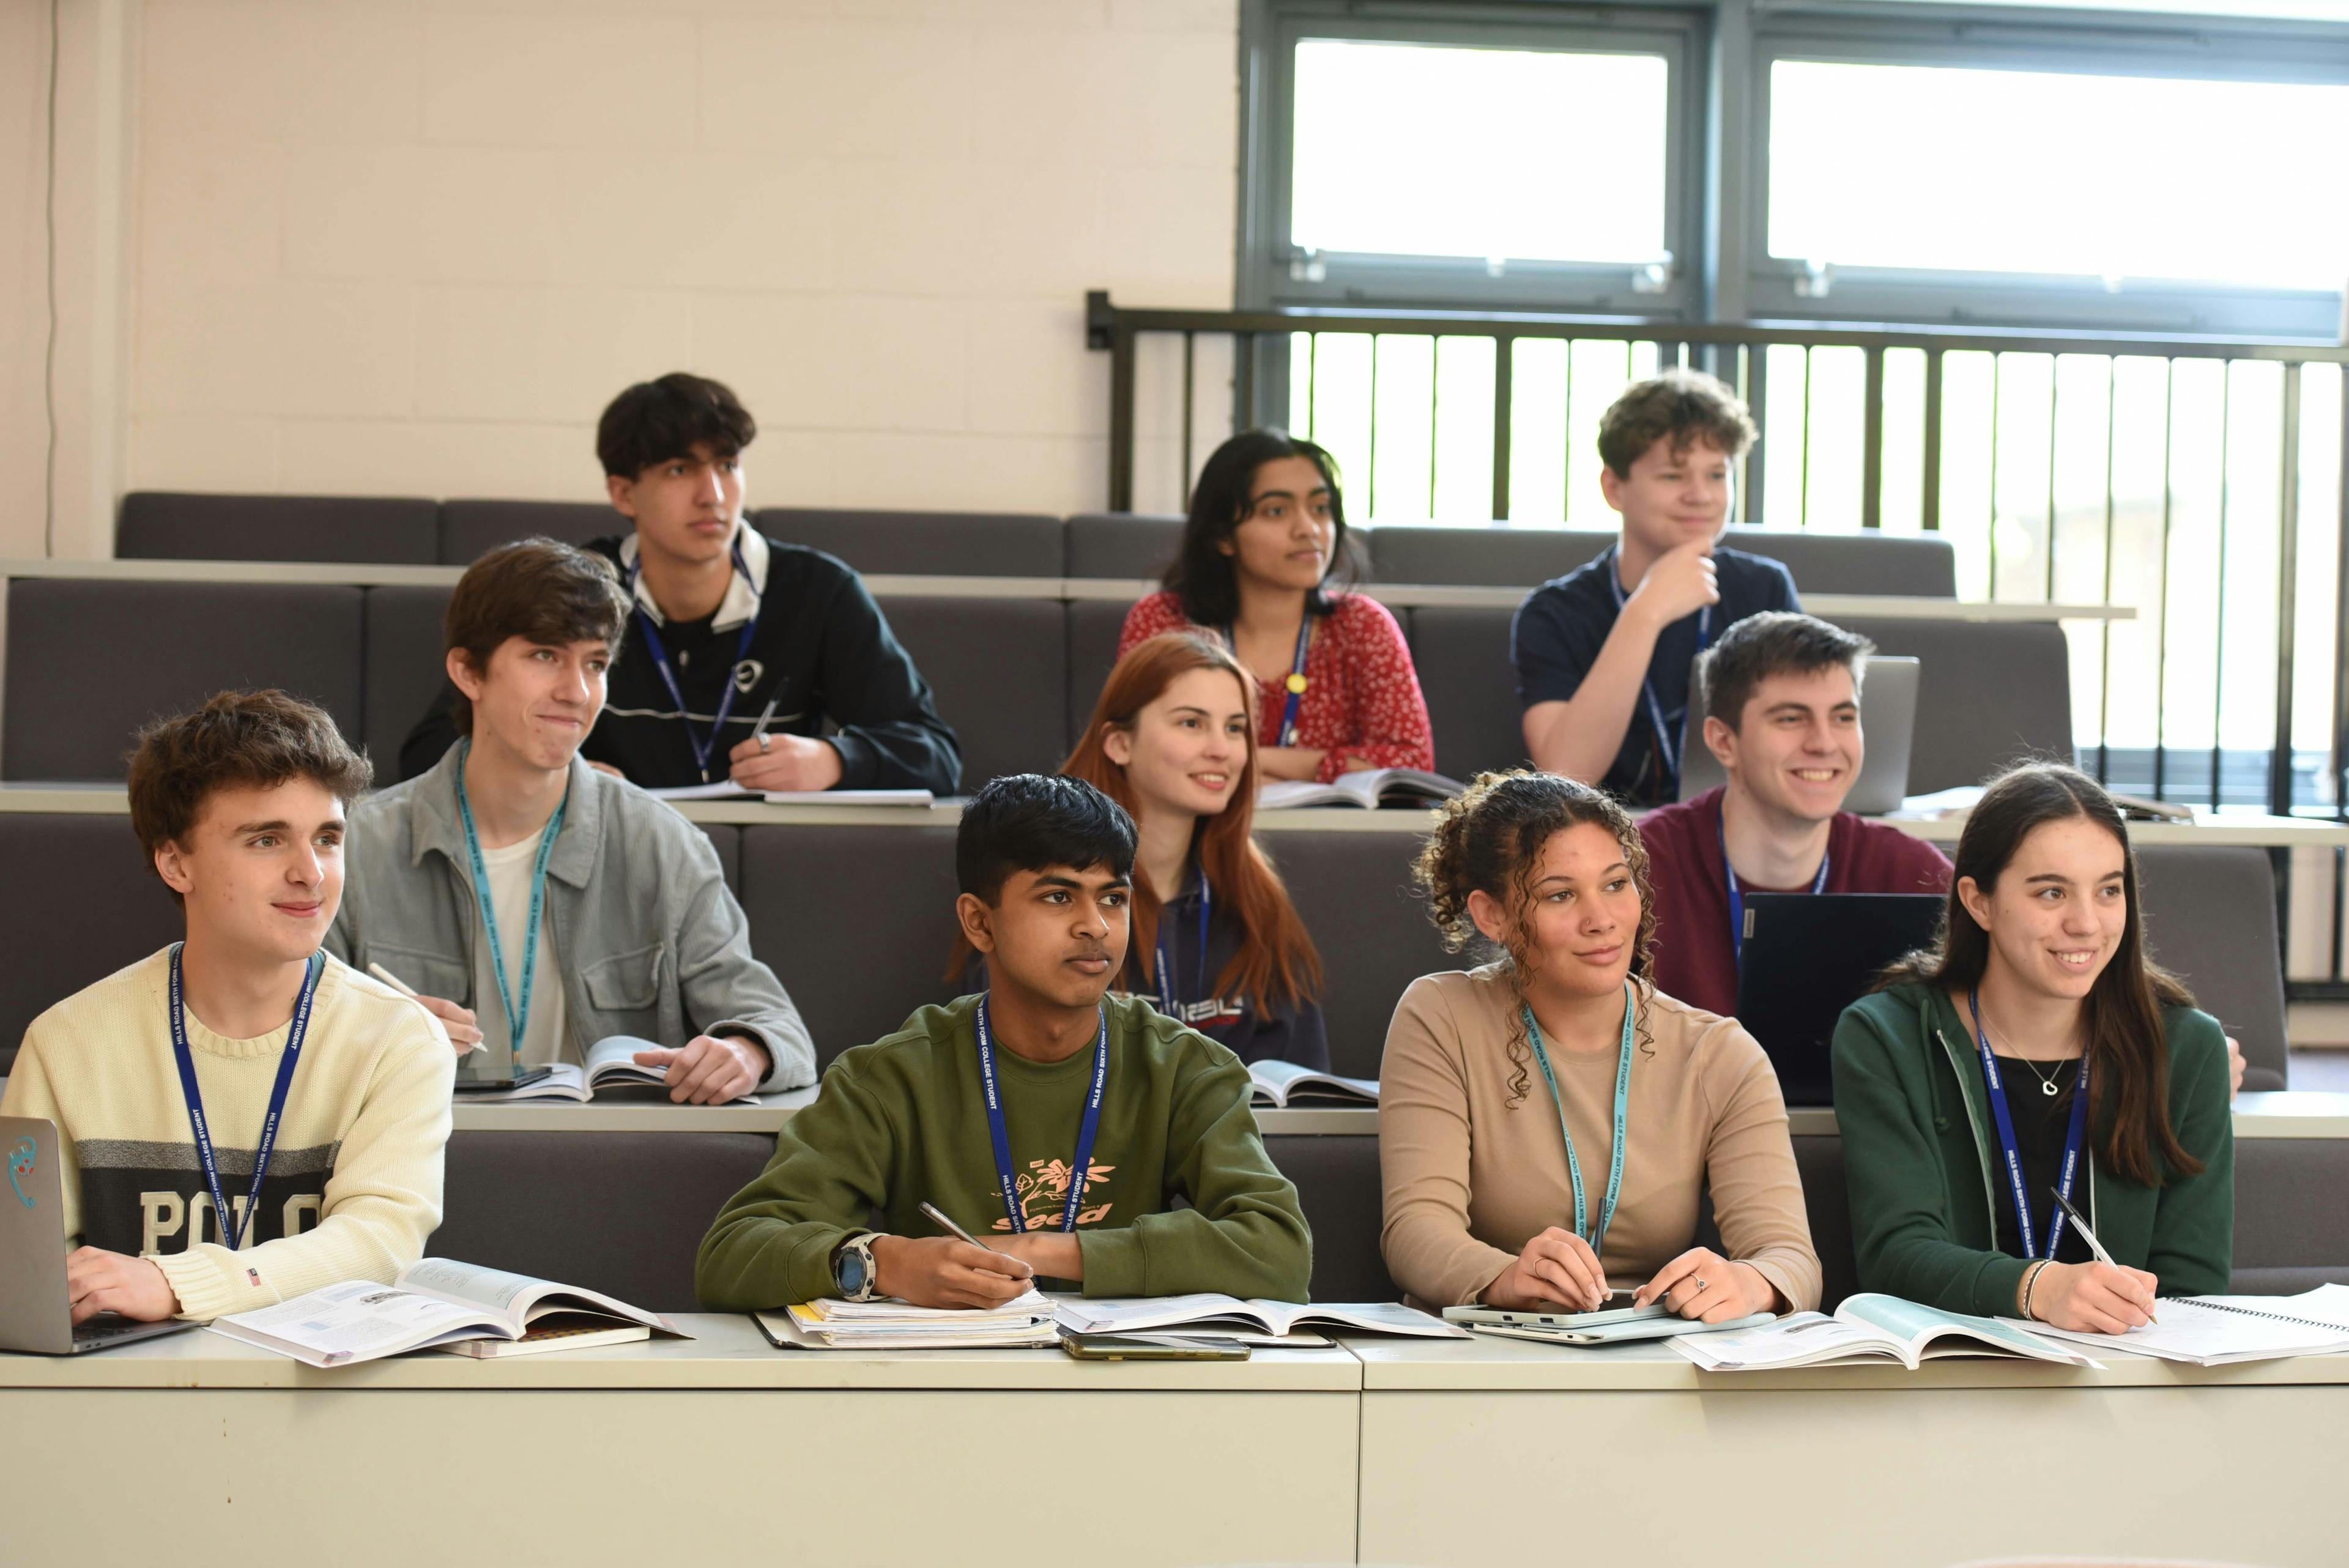 Group of students in lecture theatre